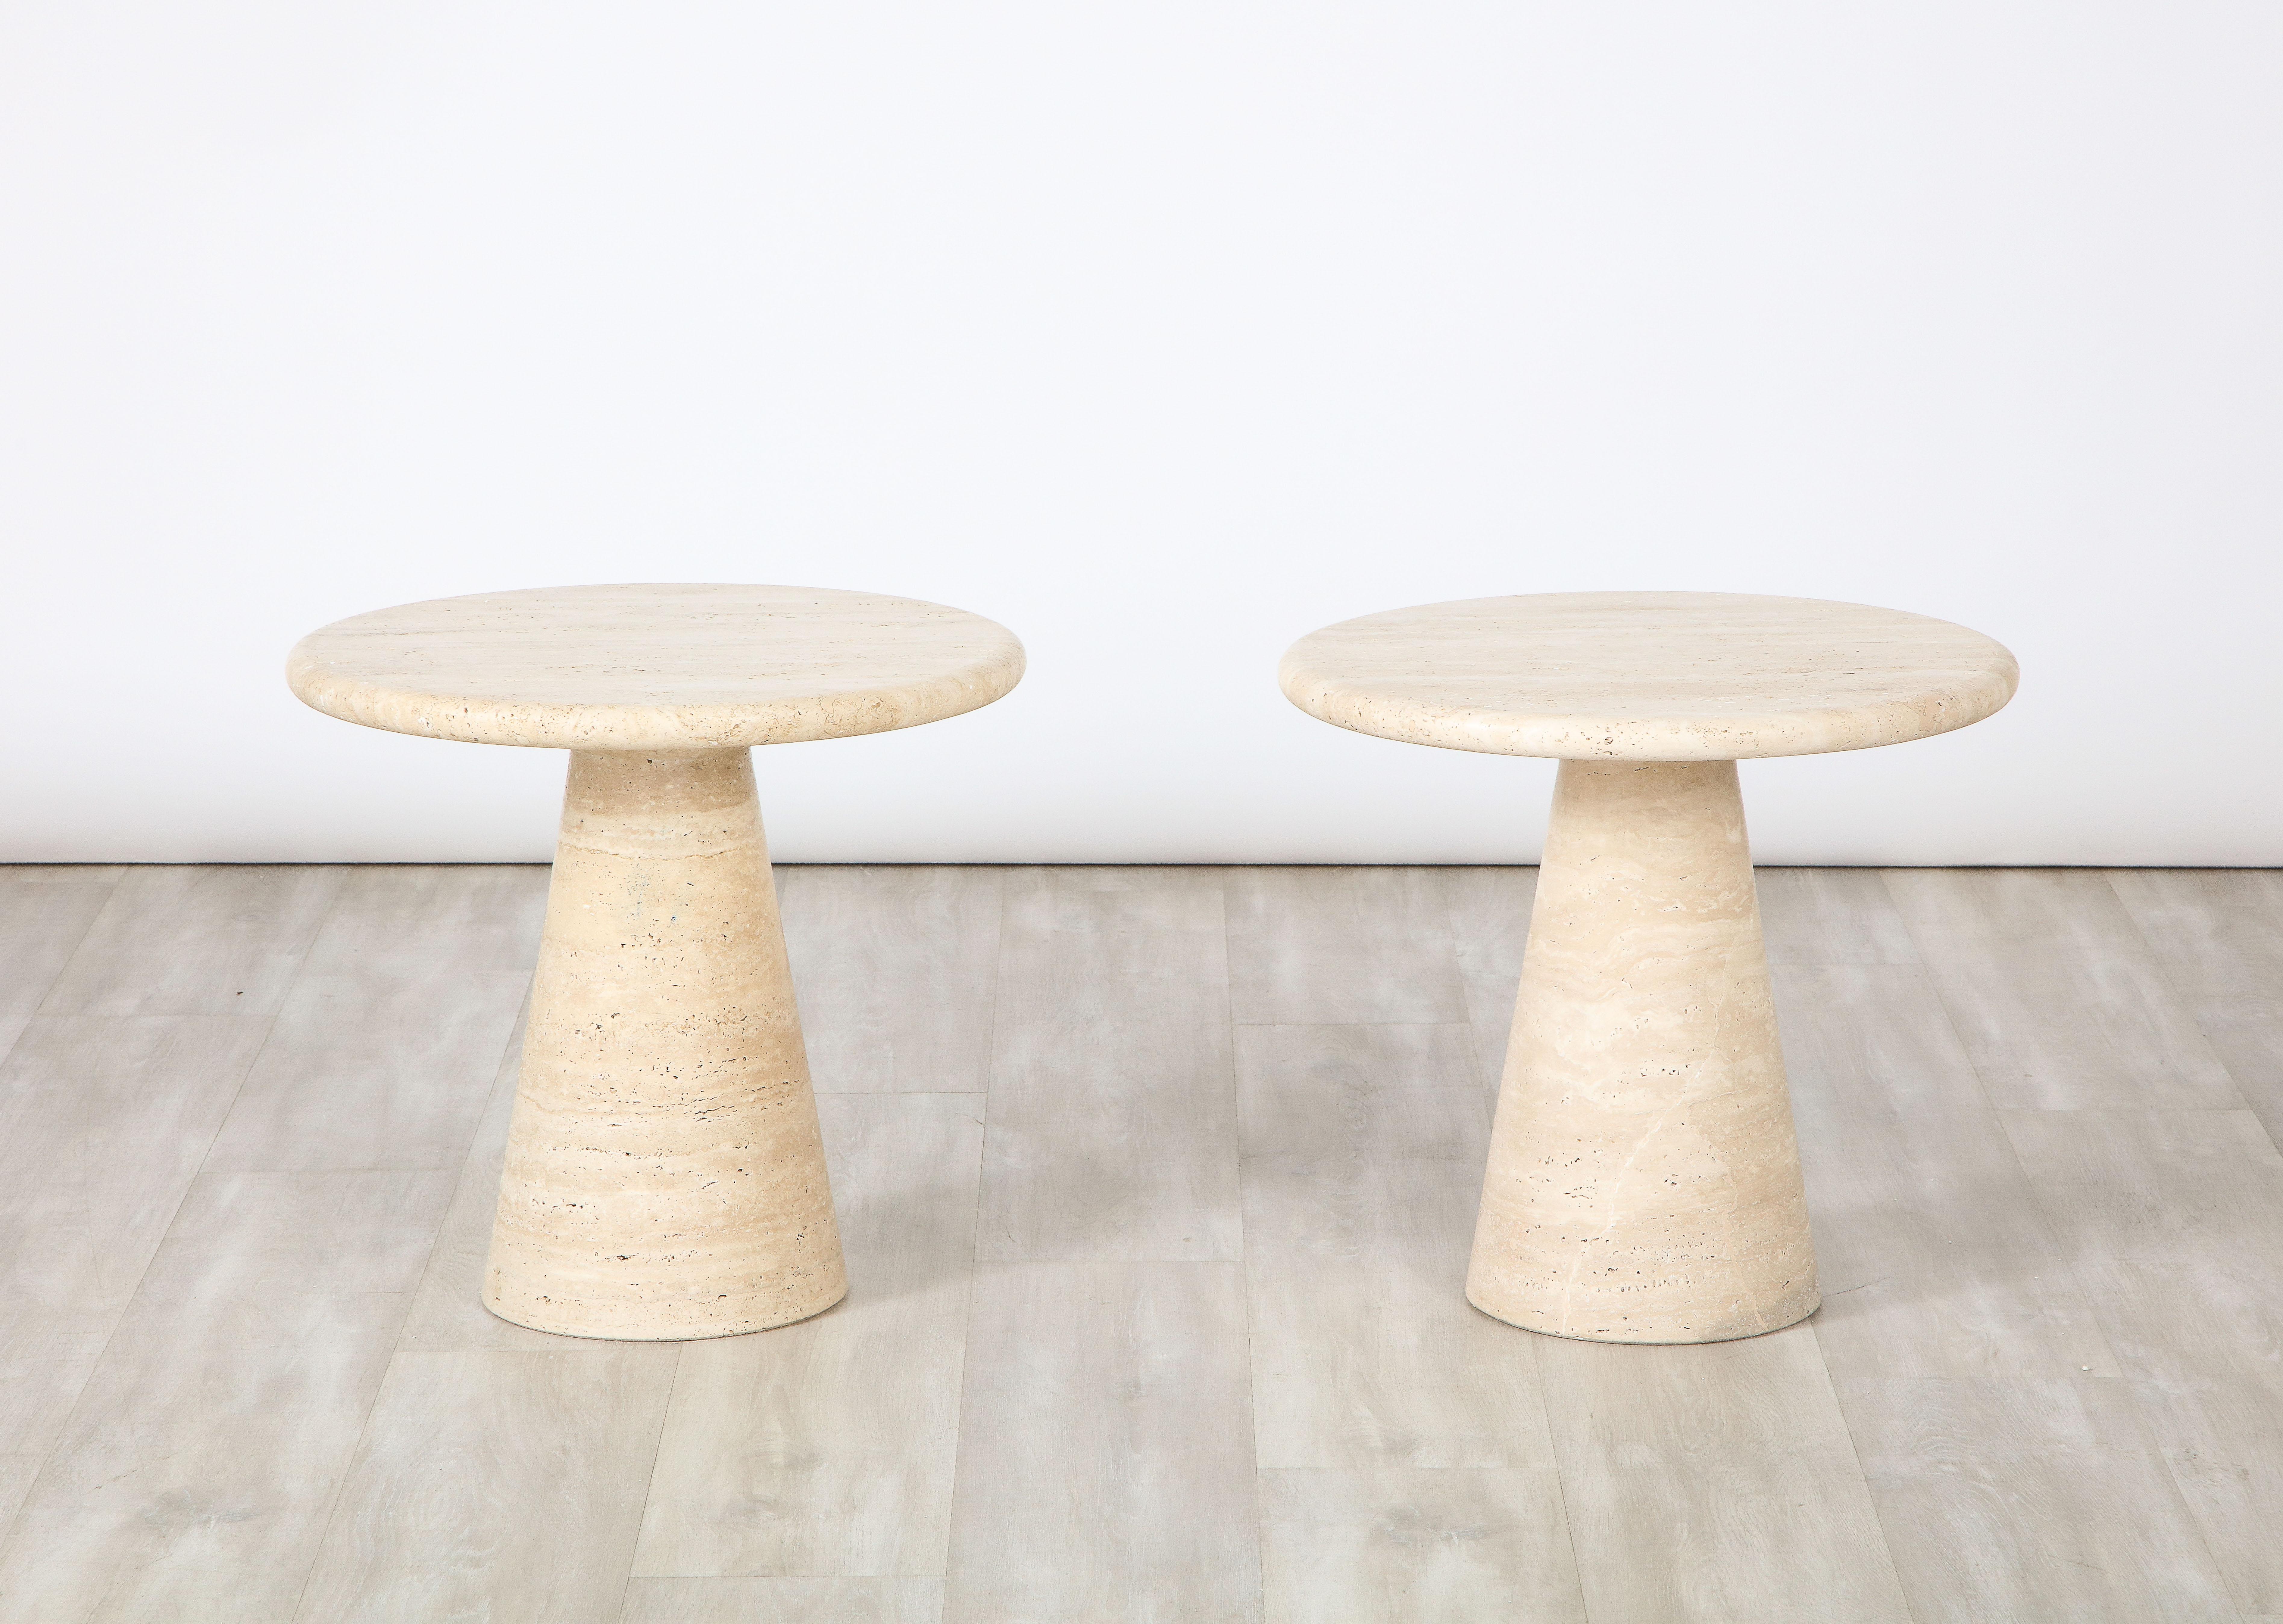 A pair of circular side tables in travertine with a conical shaped base. The form is extremely simple allowing the beauty and variation of the natural stone to take center stage. 
Italy, circa 1970 
Size: 17 3/4